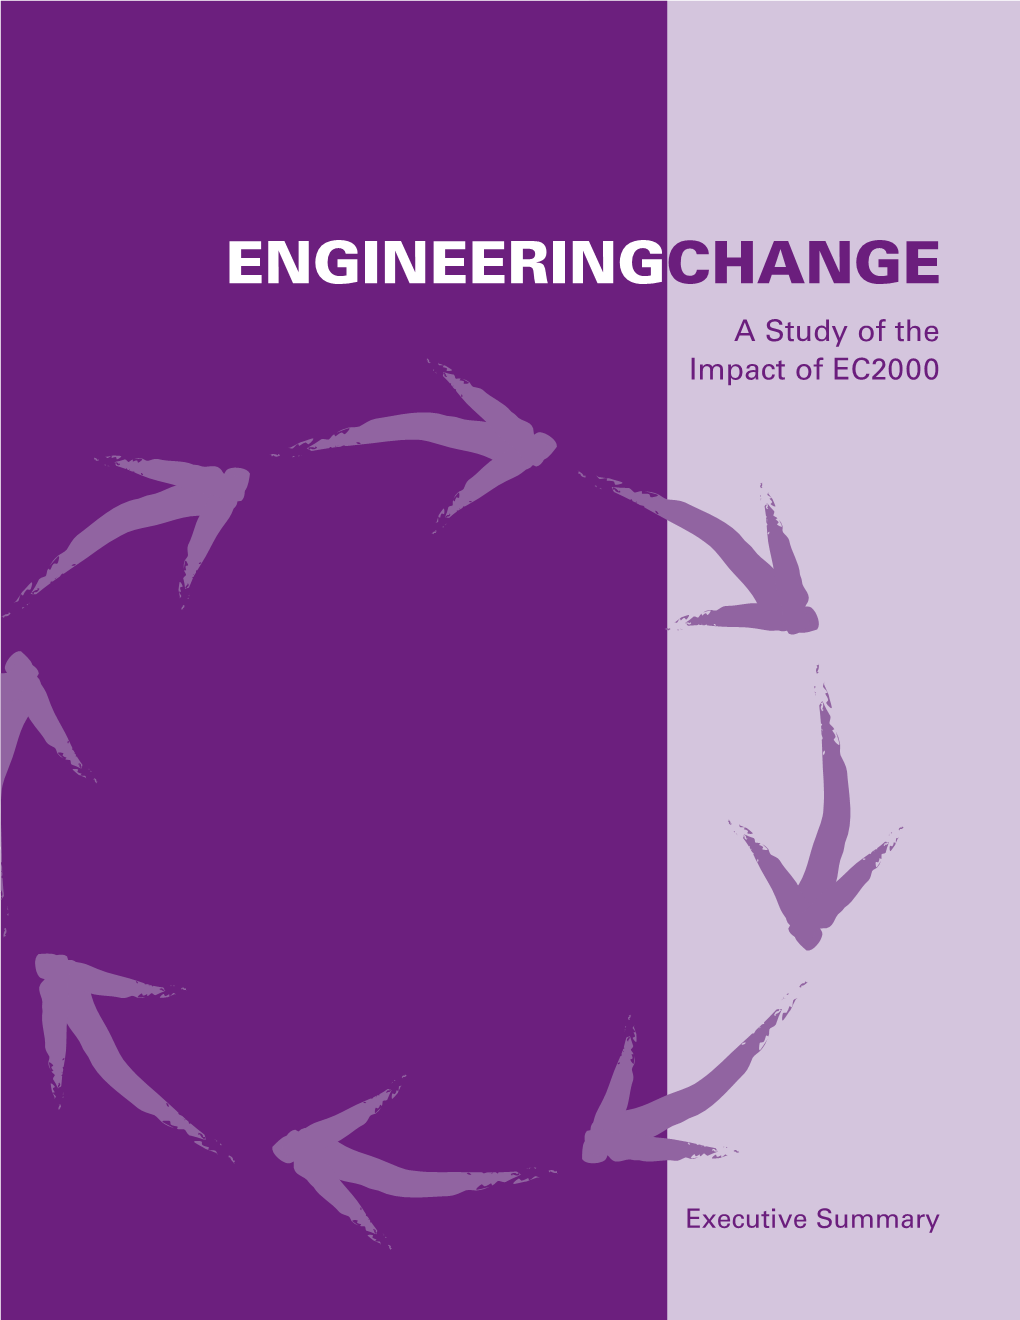 ENGINEERING CHANGE a Study of the Impact of EC2000